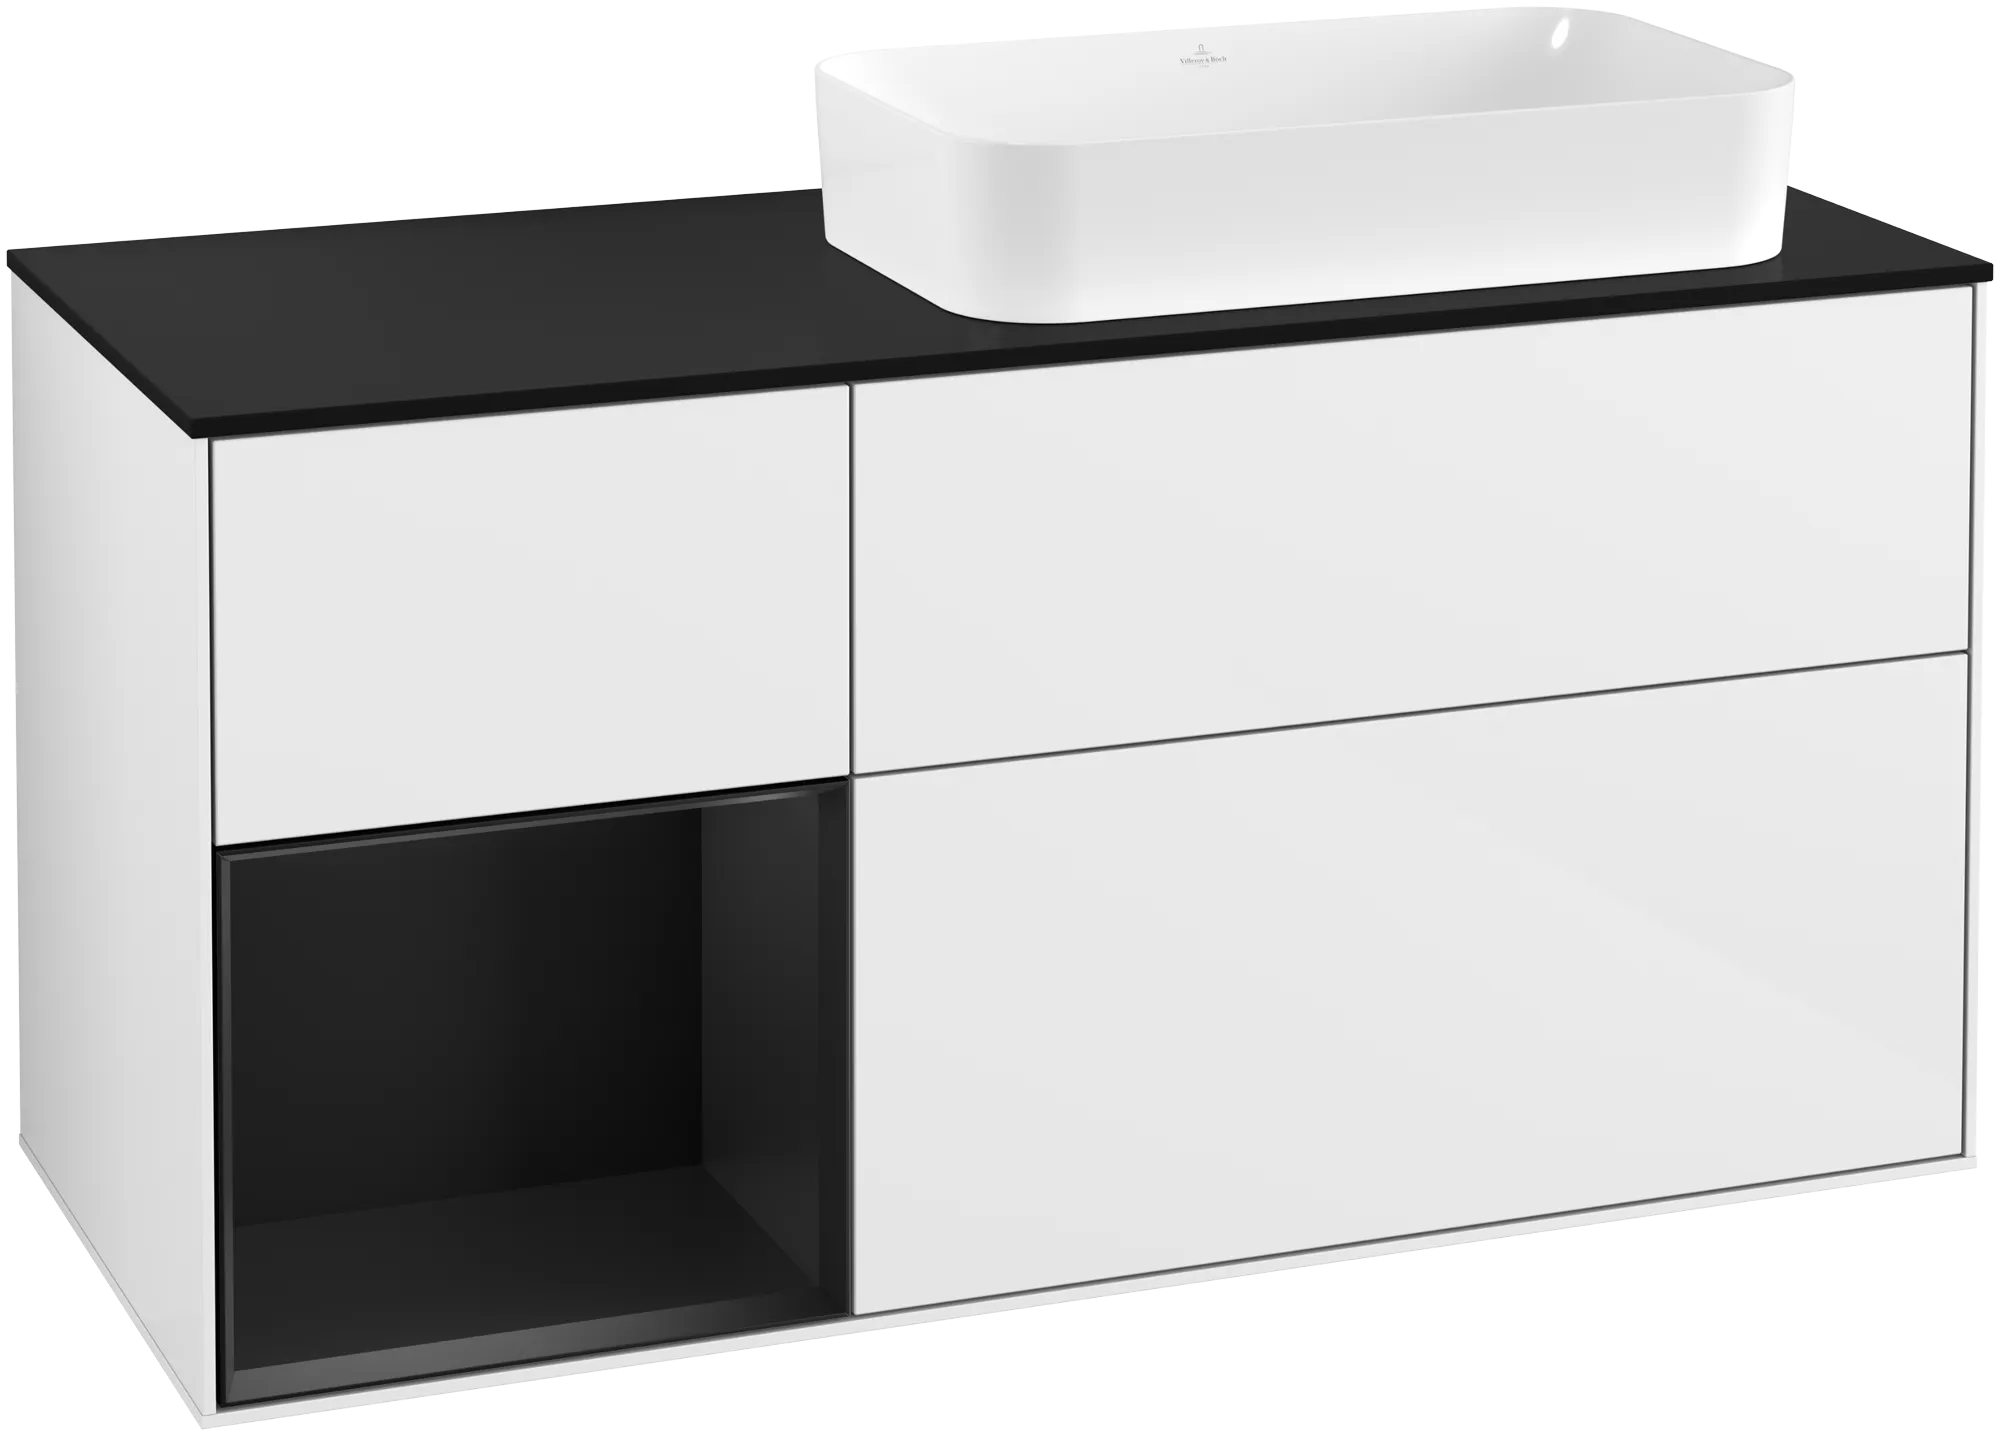 Picture of VILLEROY BOCH Finion Vanity unit, with lighting, 3 pull-out compartments, 1200 x 603 x 501 mm, Glossy White Lacquer / Black Matt Lacquer / Glass Black Matt #G272PDGF